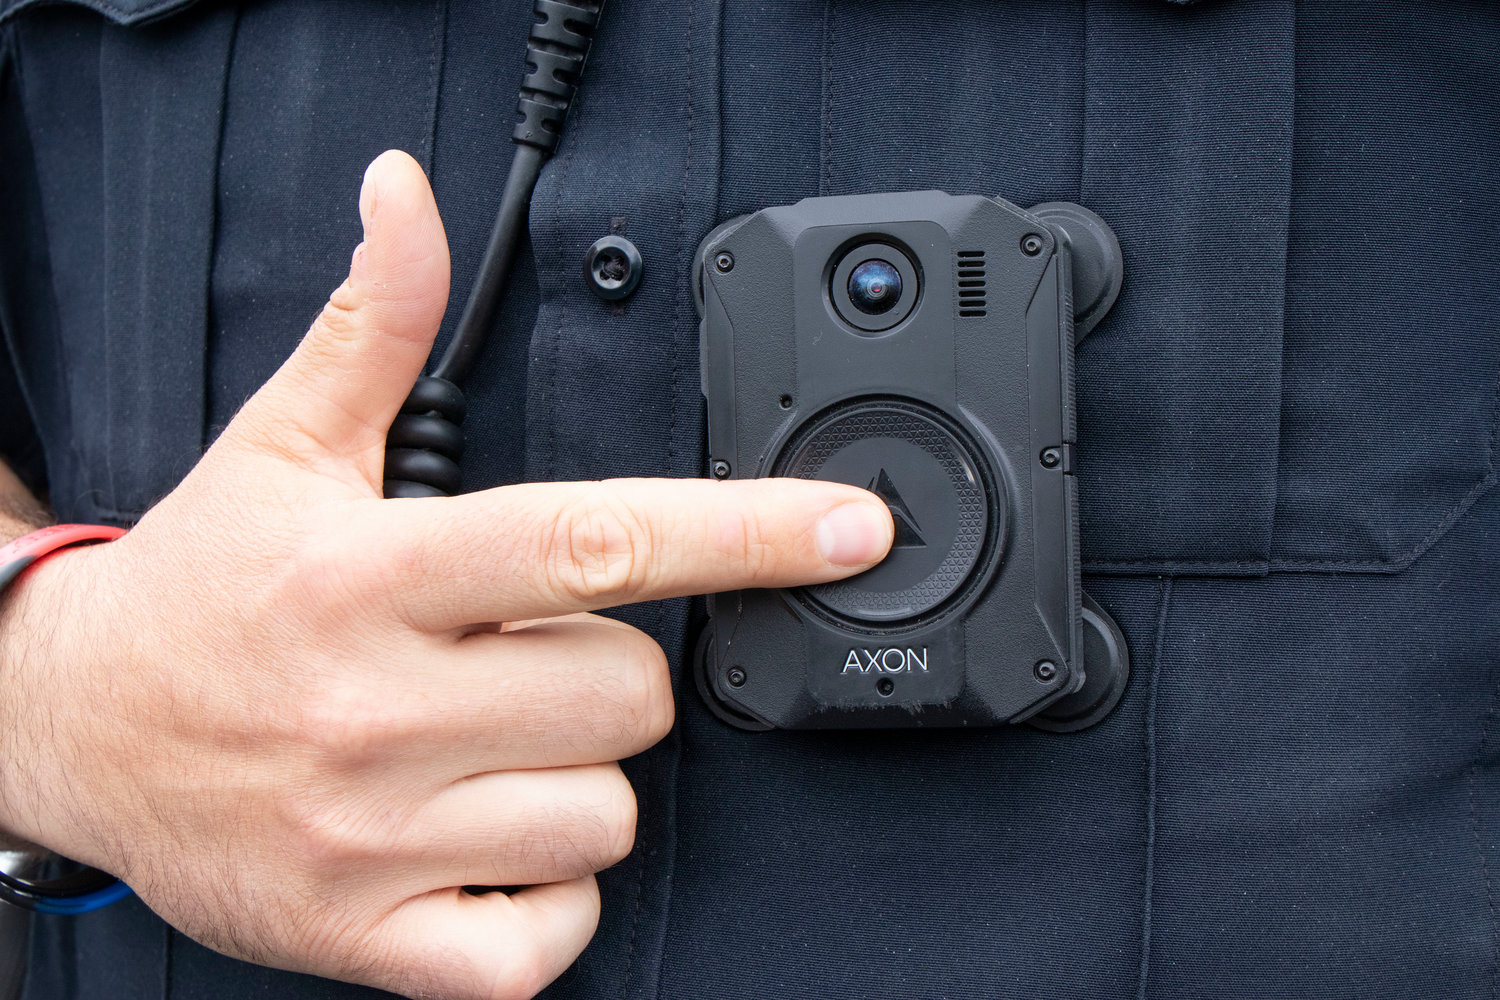 The body cameras are activated with the touch a button on the front.